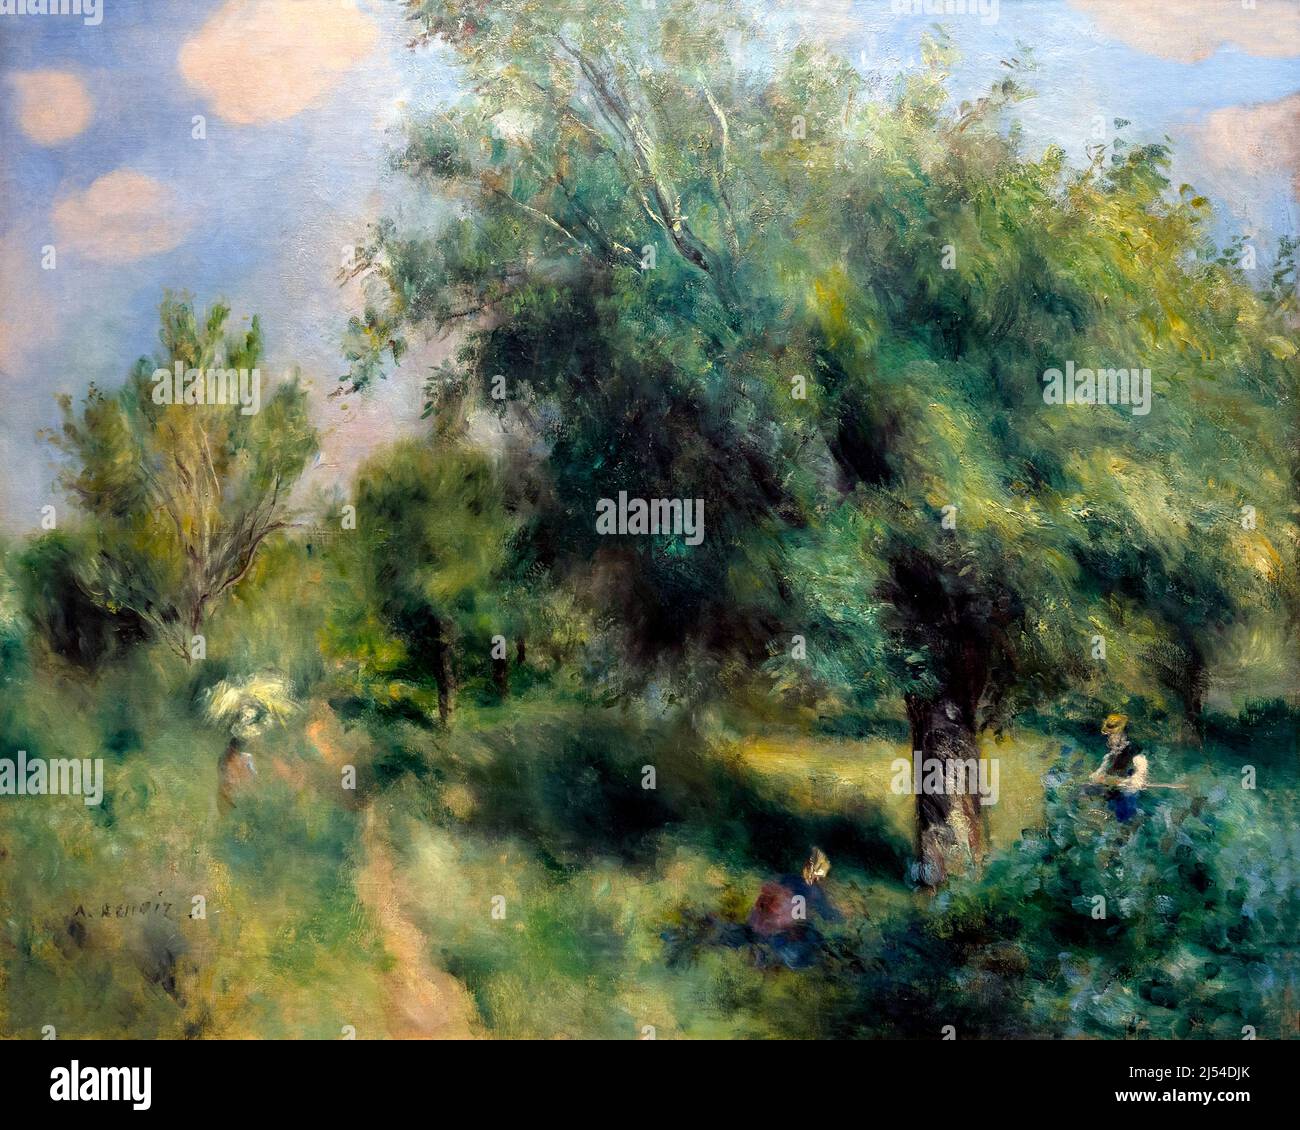 The English Pear Tree, The Orchard at Louveciennes, Le Poirier d'Angleterre, Le Verger a Louveciennes, Pierre-Auguste Renoir, 1875, Musee D'Orsay, Par Stockfoto